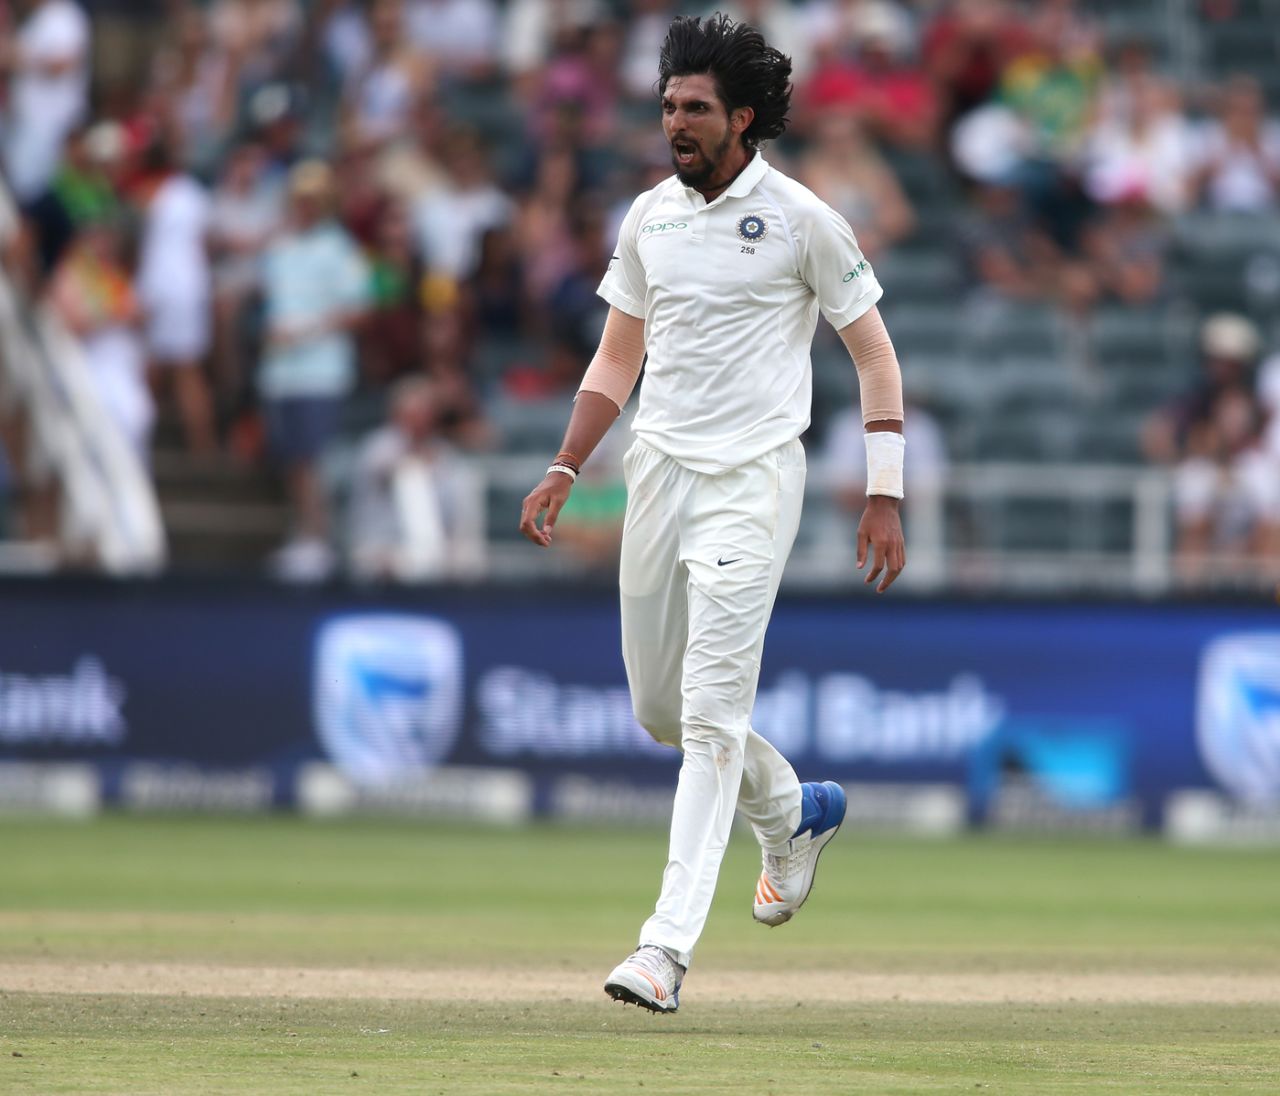 Ishant Sharma is congratulated by his team-mates upon picking up a wicket, South Africa v India, 3rd Test, Johannesburg, 4th day, January 27, 2018